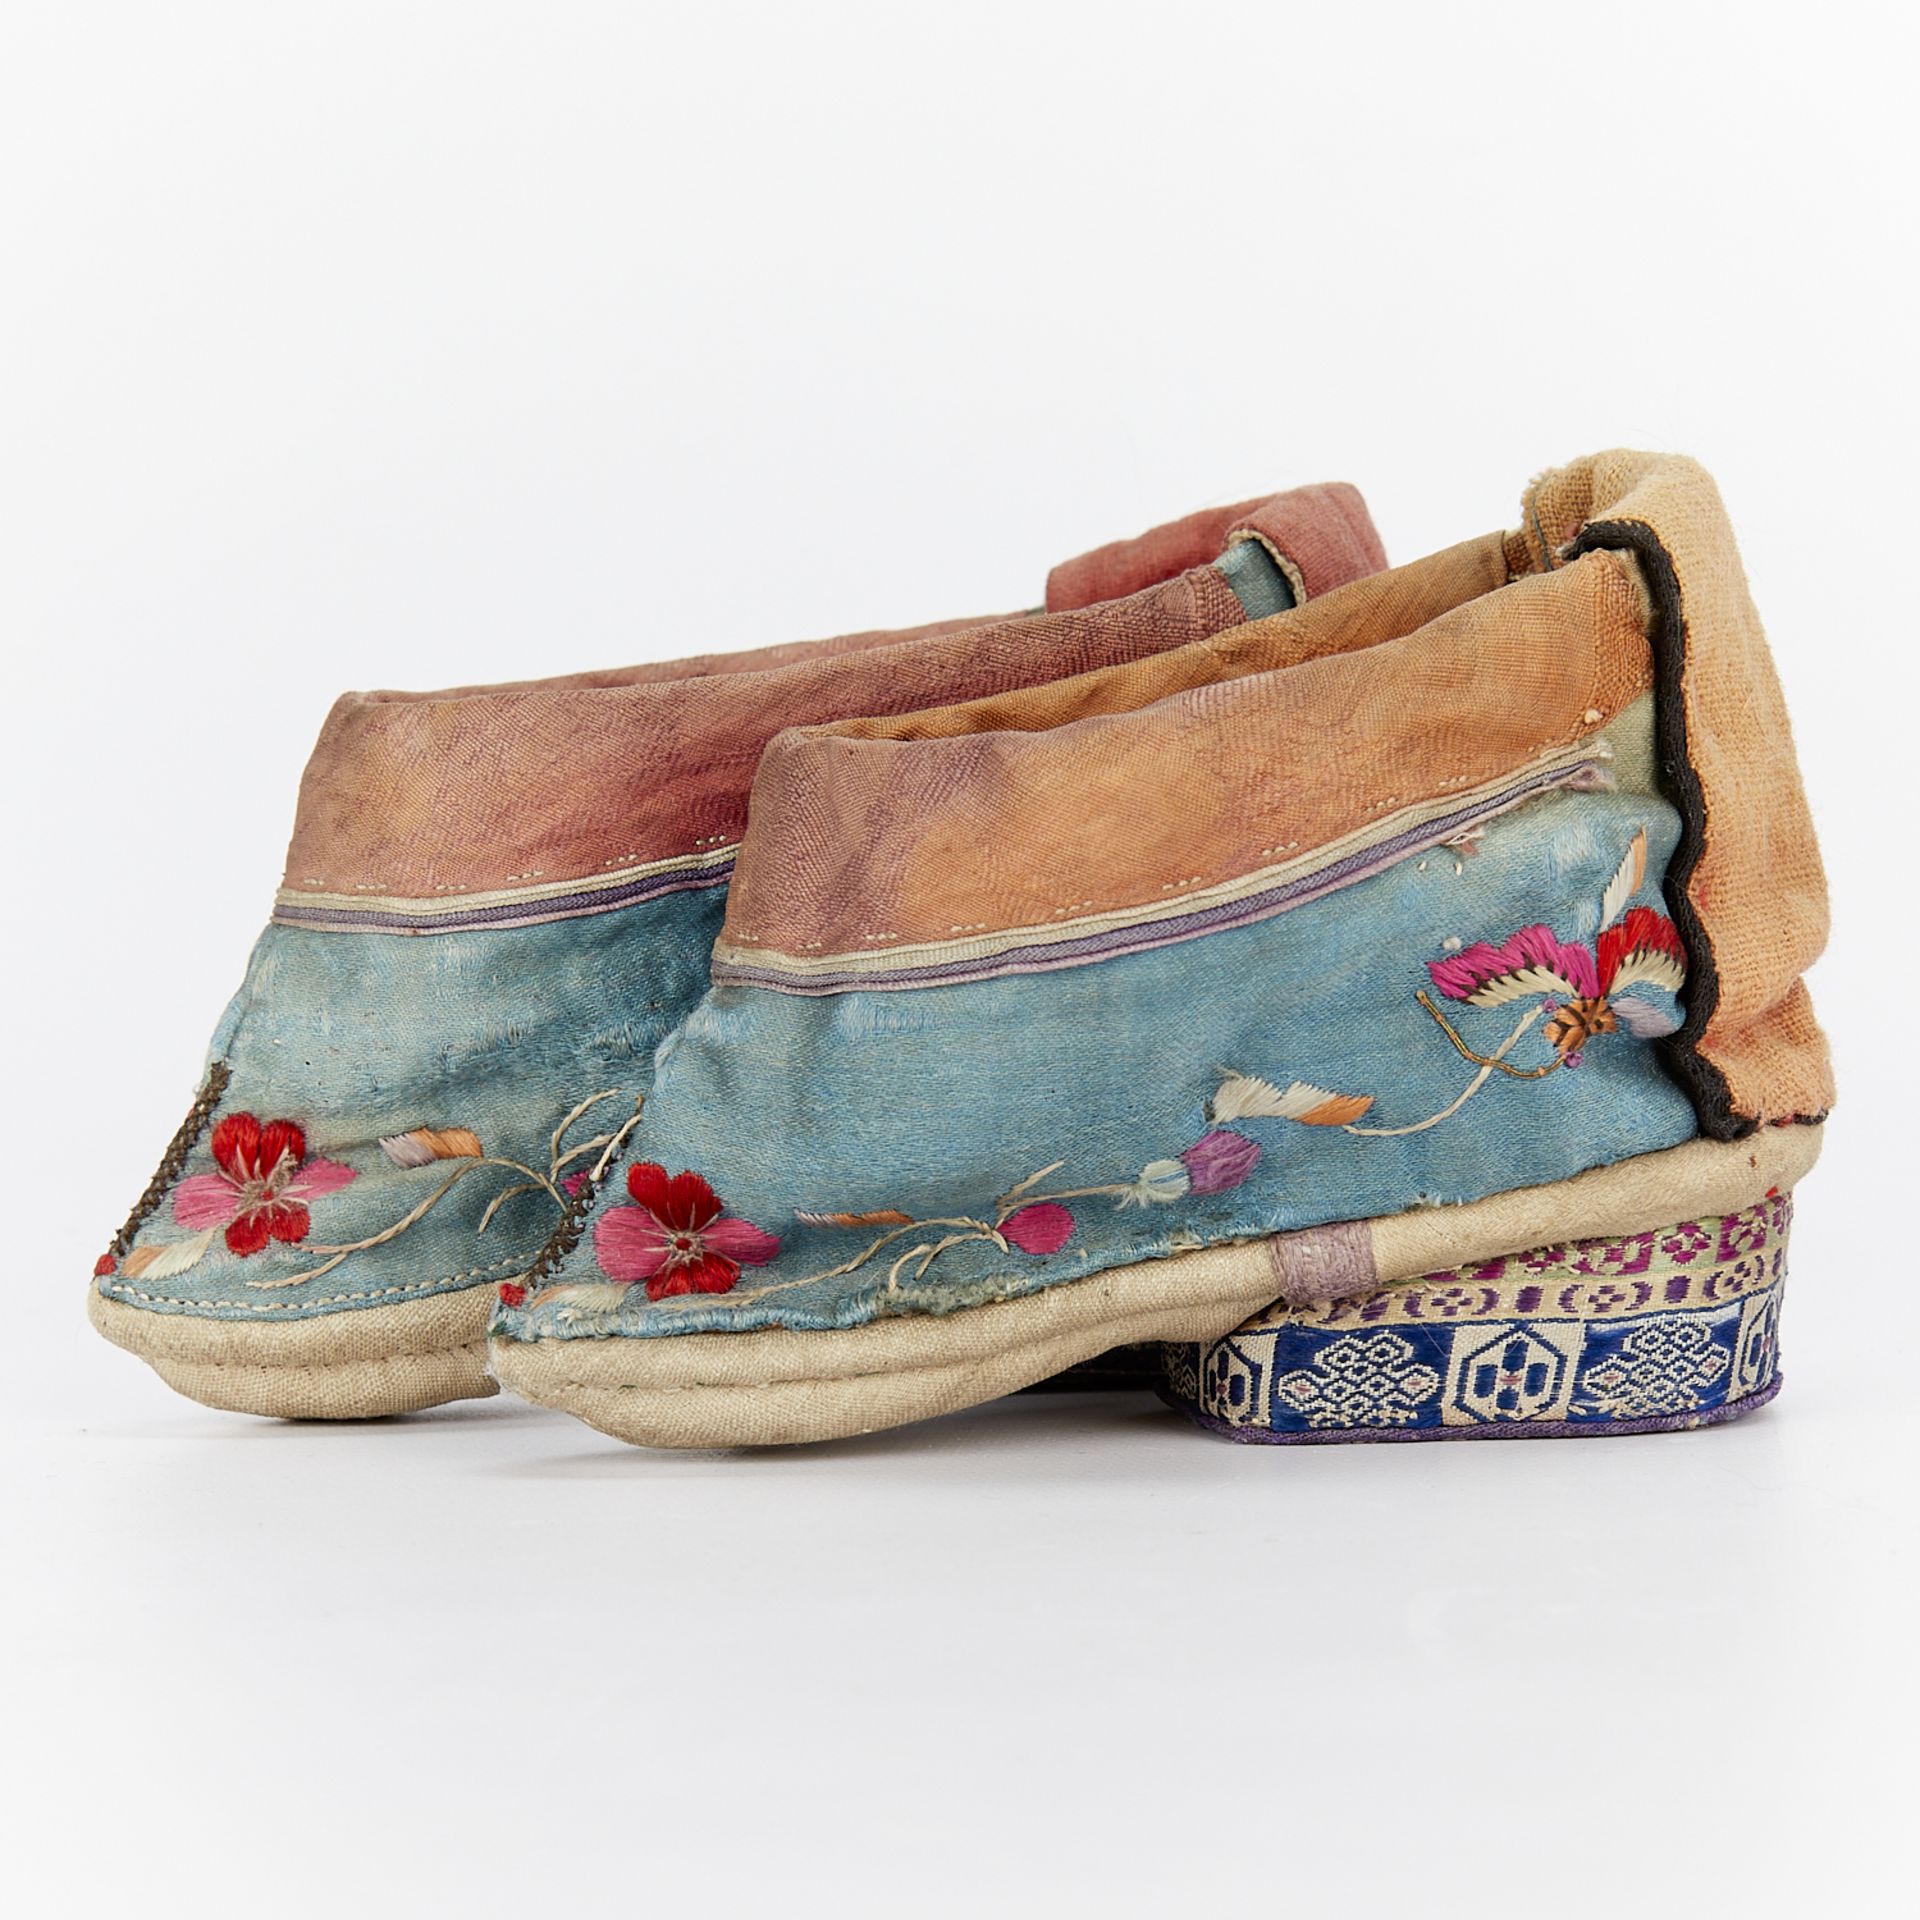 6 Pairs of Chinese Silk Foot Binding Shoes - Image 10 of 12